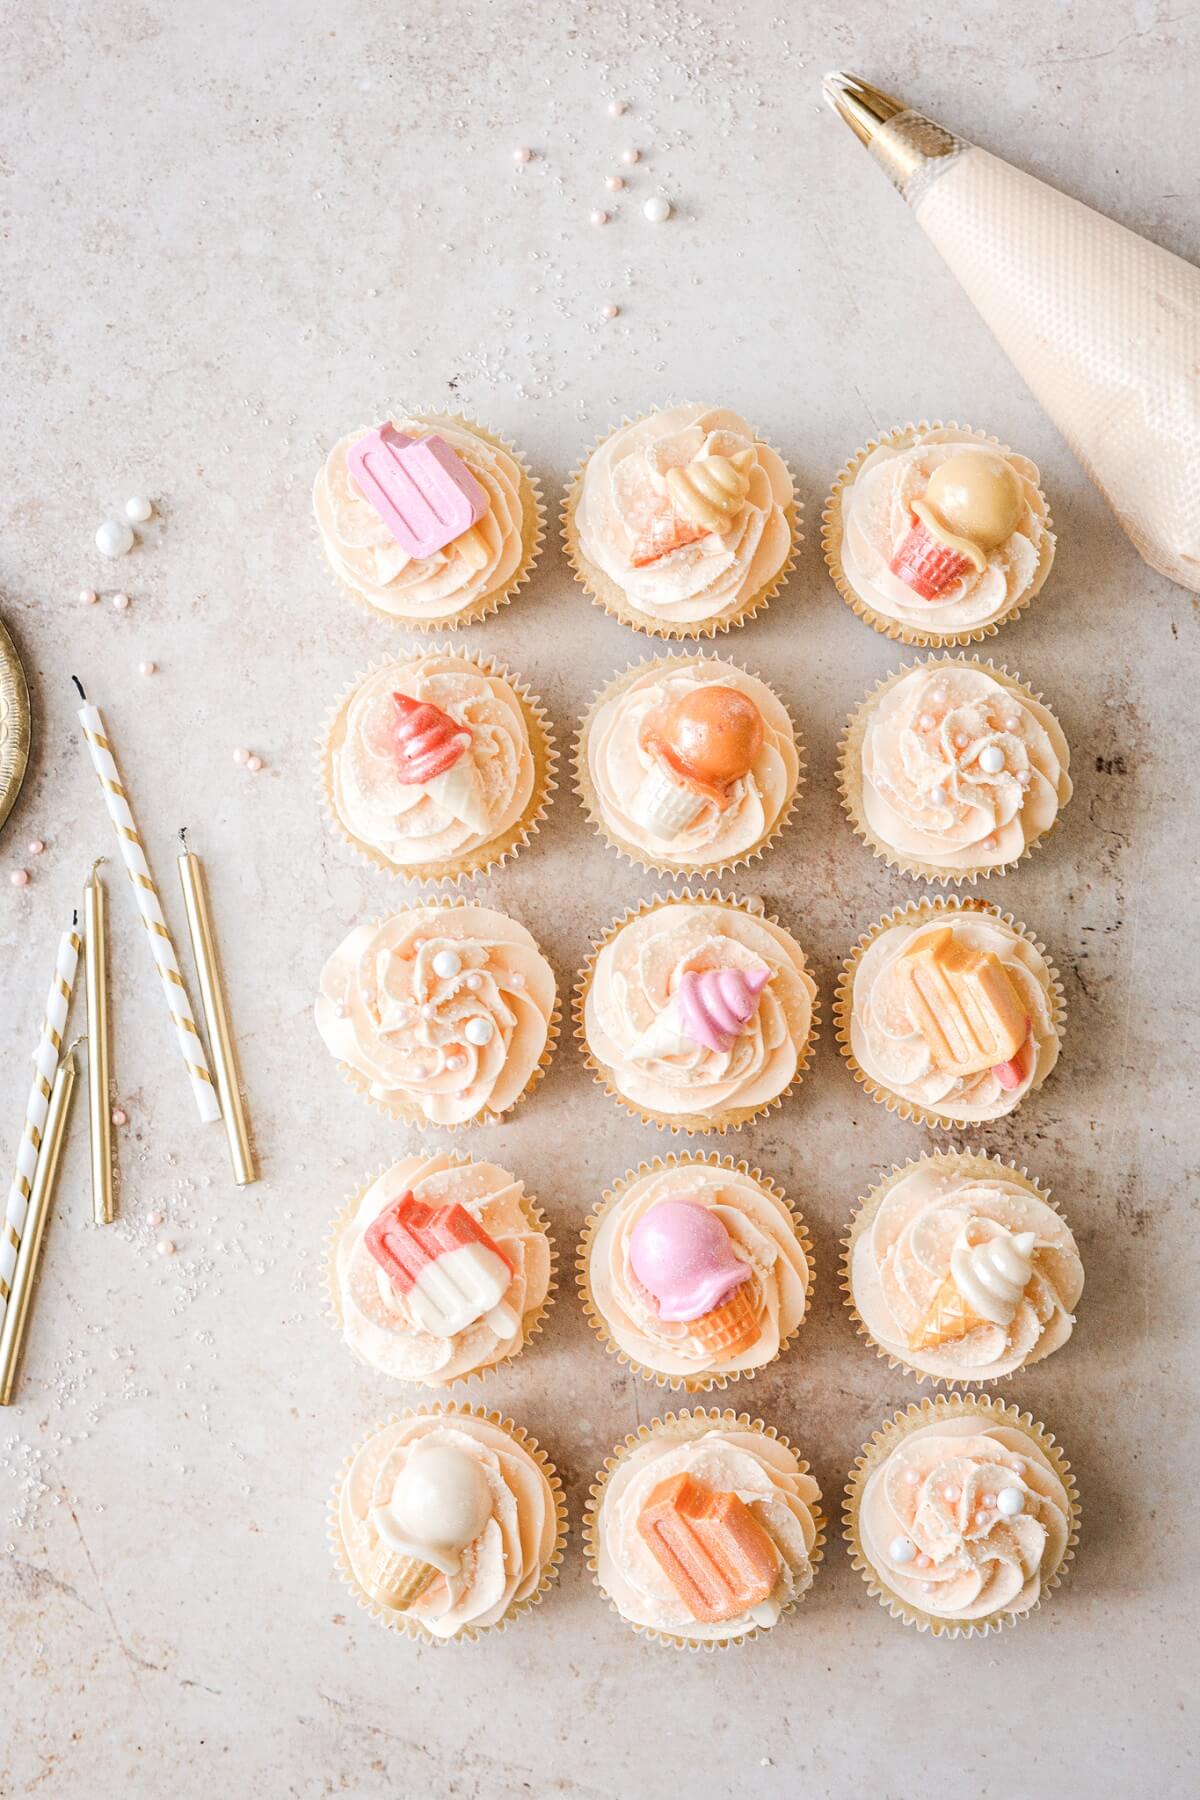 Orange creamsicle cupcakes with ice cream cone cupcake toppers.